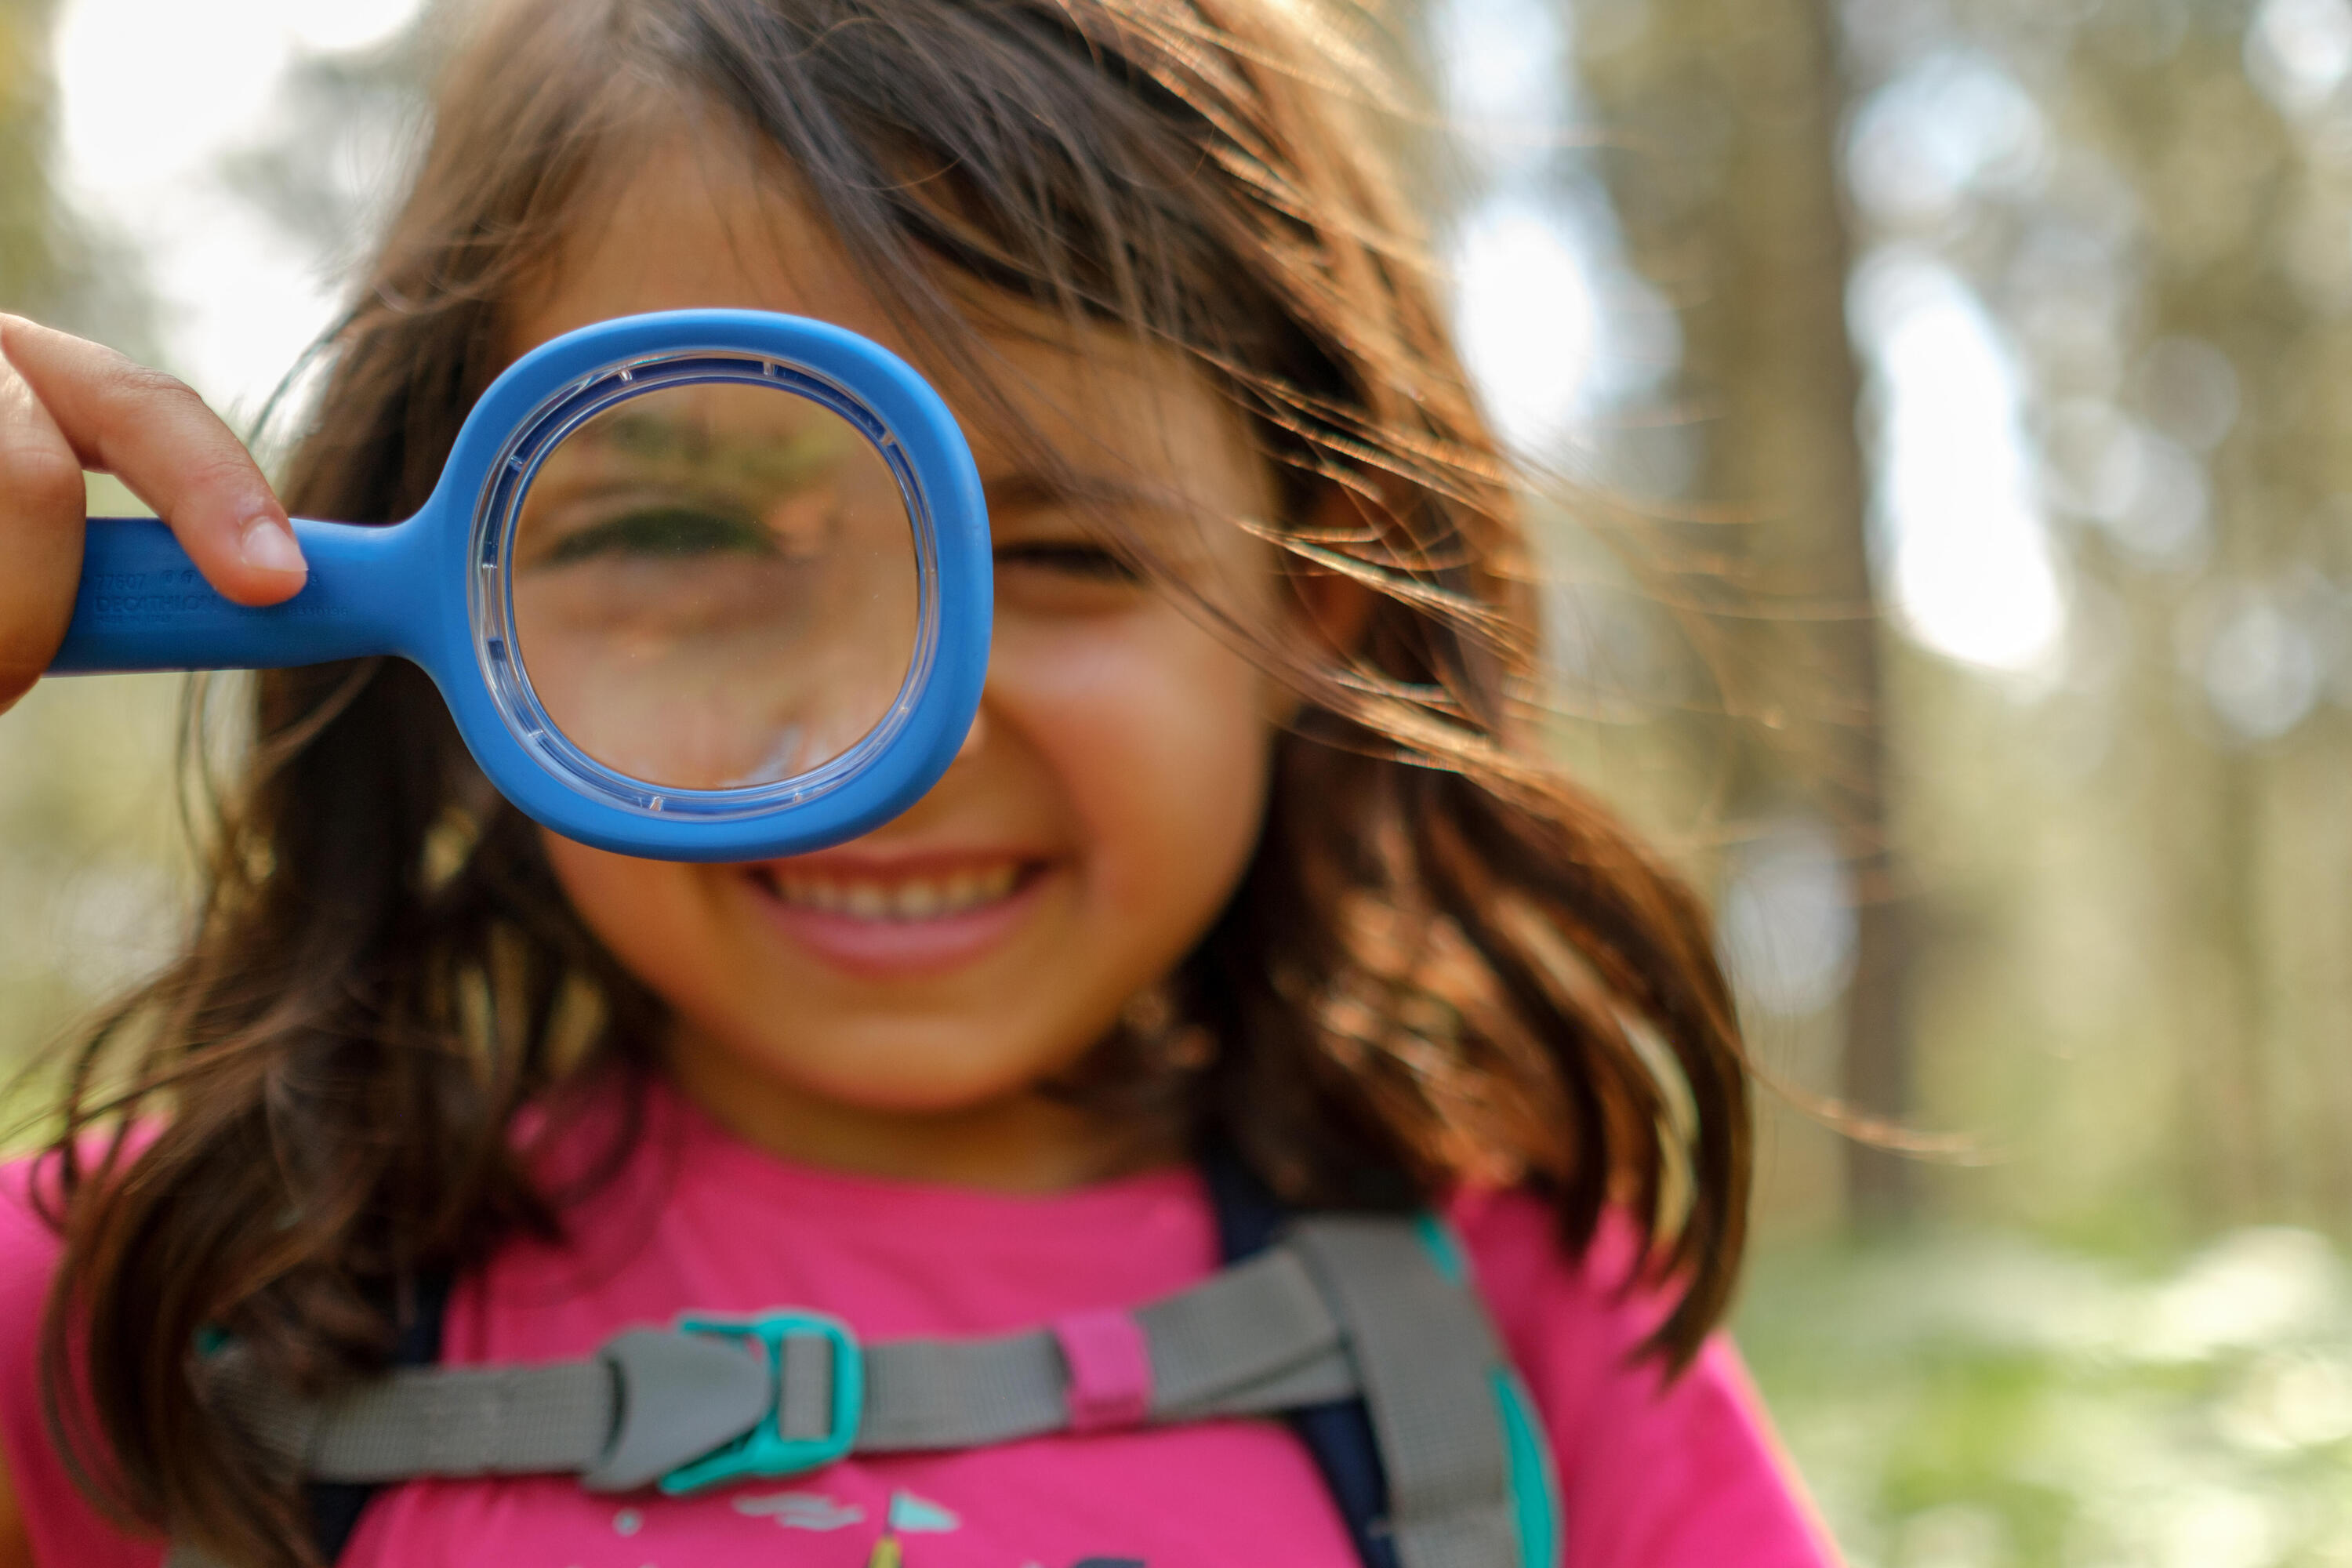 Kids' hiking magnifying glass MH100 – 3 X magnification - Blue 2/3